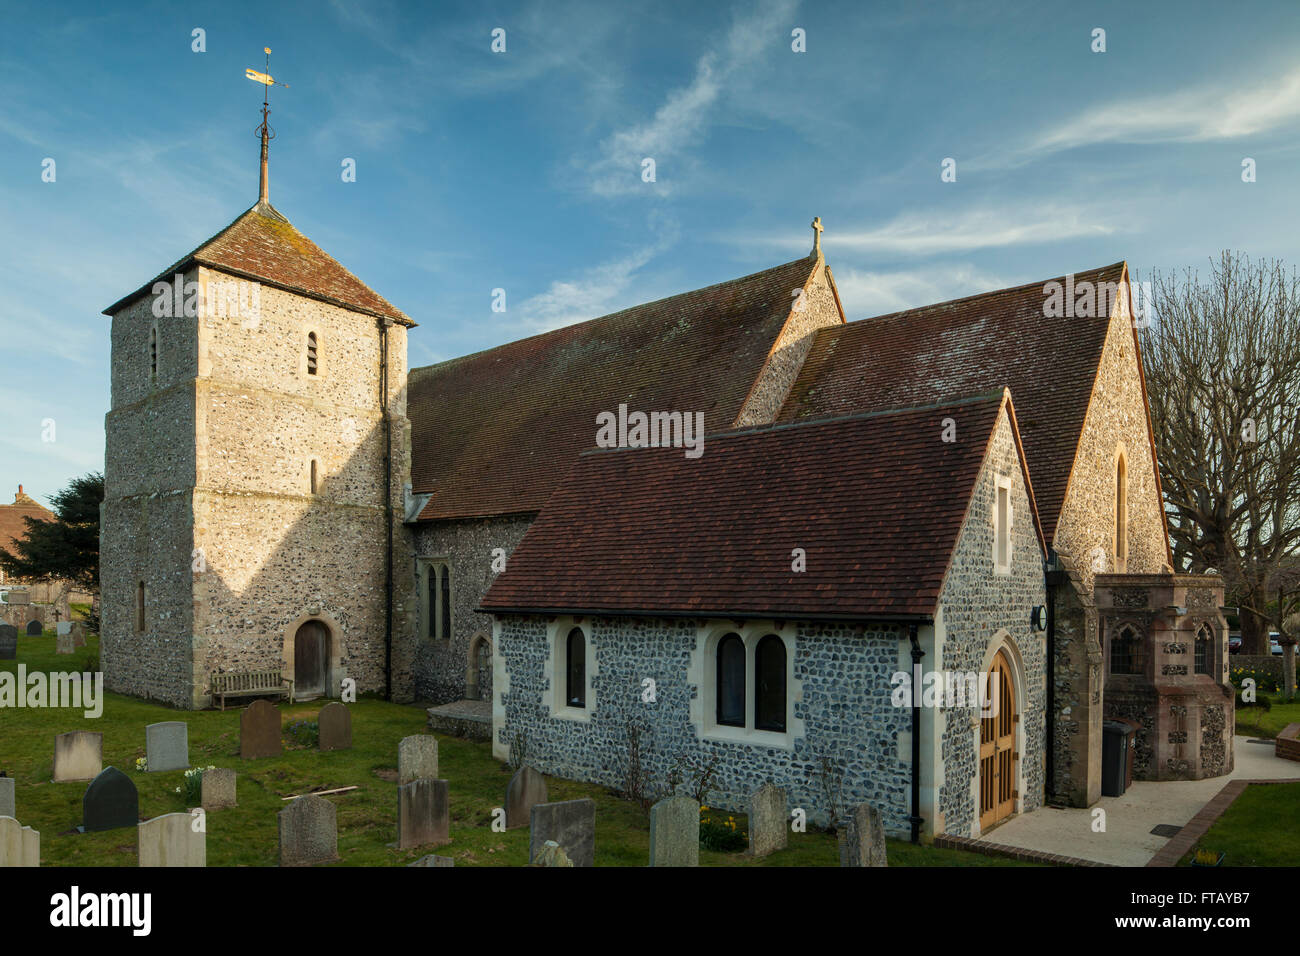 St Simon and St Jude church in East Dean, East Sussex, England. South Downs National Park. Stock Photo